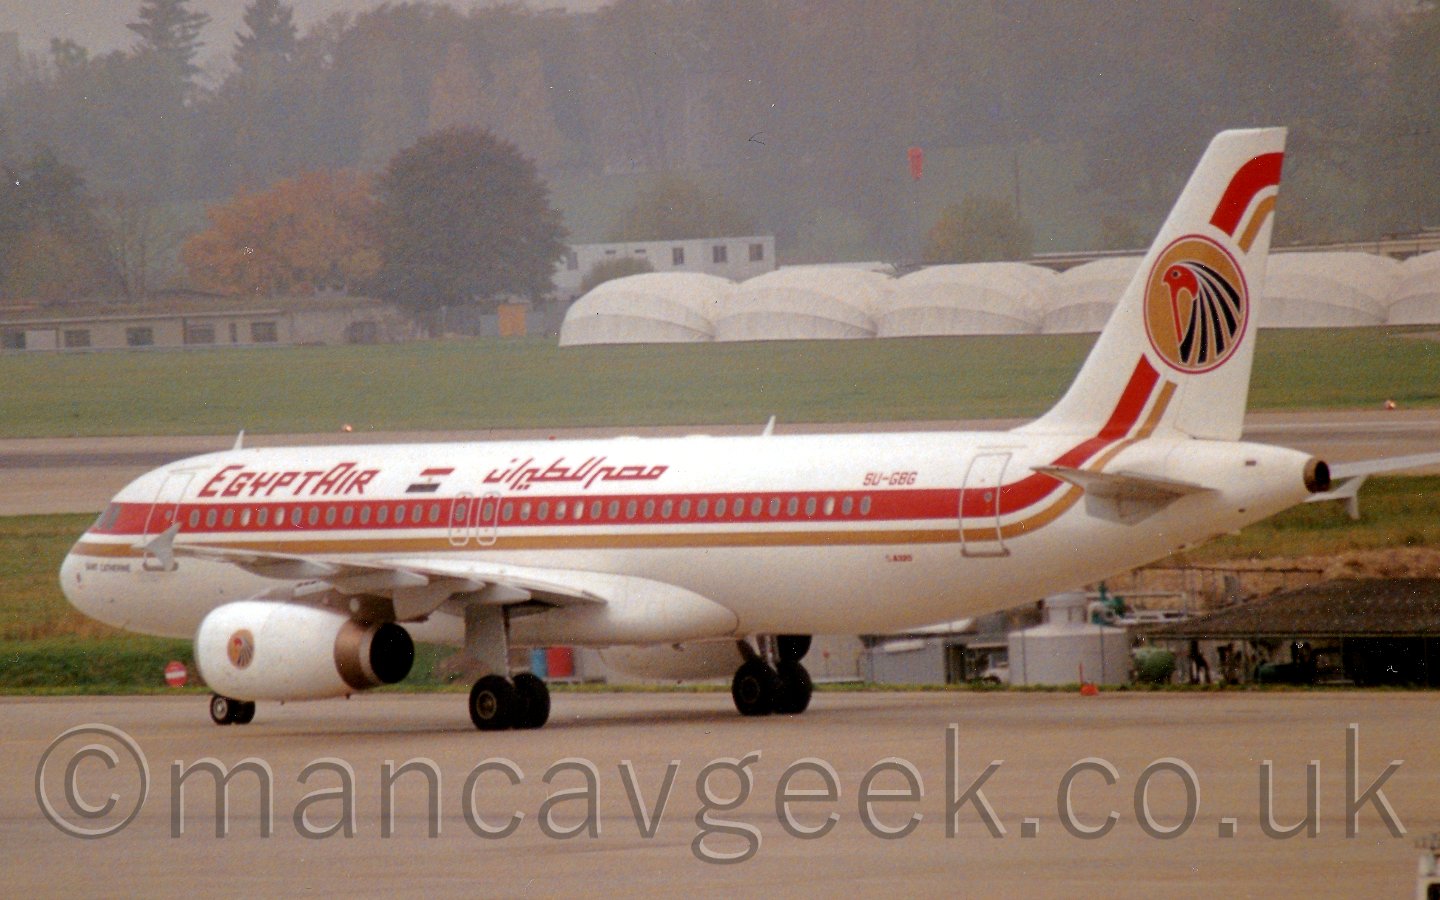 Side view of a twin engined jet airliner taxiing from right to left, facing slightly away from the camera. The plane is mostly white, with a thick red and thin golden stripe running along the body and up in to the tail. There are red EgyptAir titleson the upper forward fuselage, in English and Arabic, on either side of an Egyptian flag. On the tail, there is a golden circle outlined in red, bearing the head of a red bird with blue plumage, actually an image of Horus, one of the Ancient Egyptian Gods, a logo that also appears on the engine pods. In the background, large areas of grass lead off to what appears to be large white circular rigid tents in front of some low buildings, with a tree-covered hillside beyond that slowly vanishing in to haze.